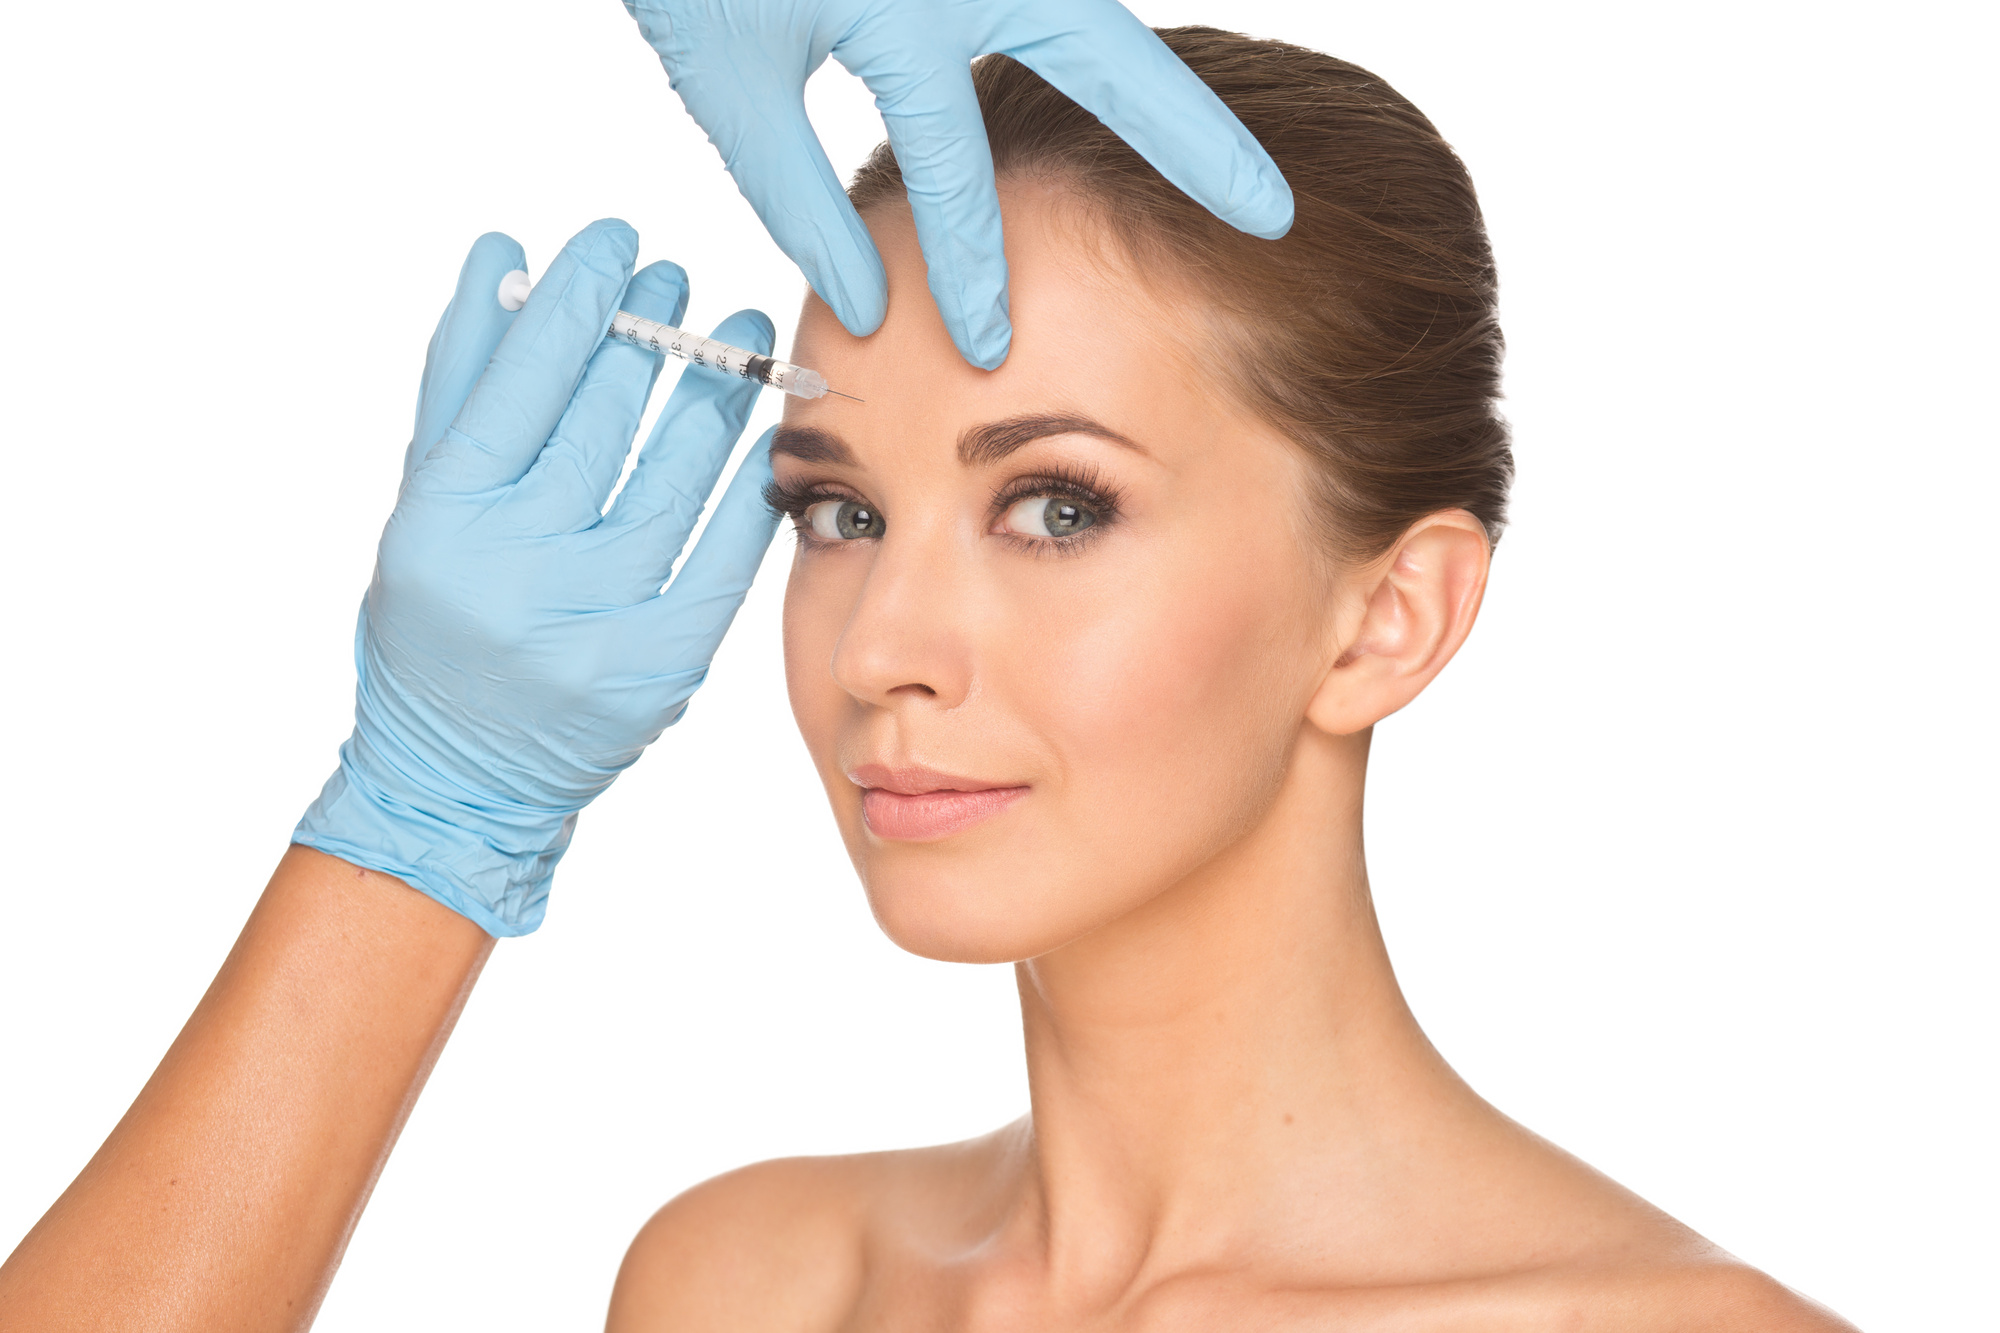 How Do Botox Injections for Pain Work?